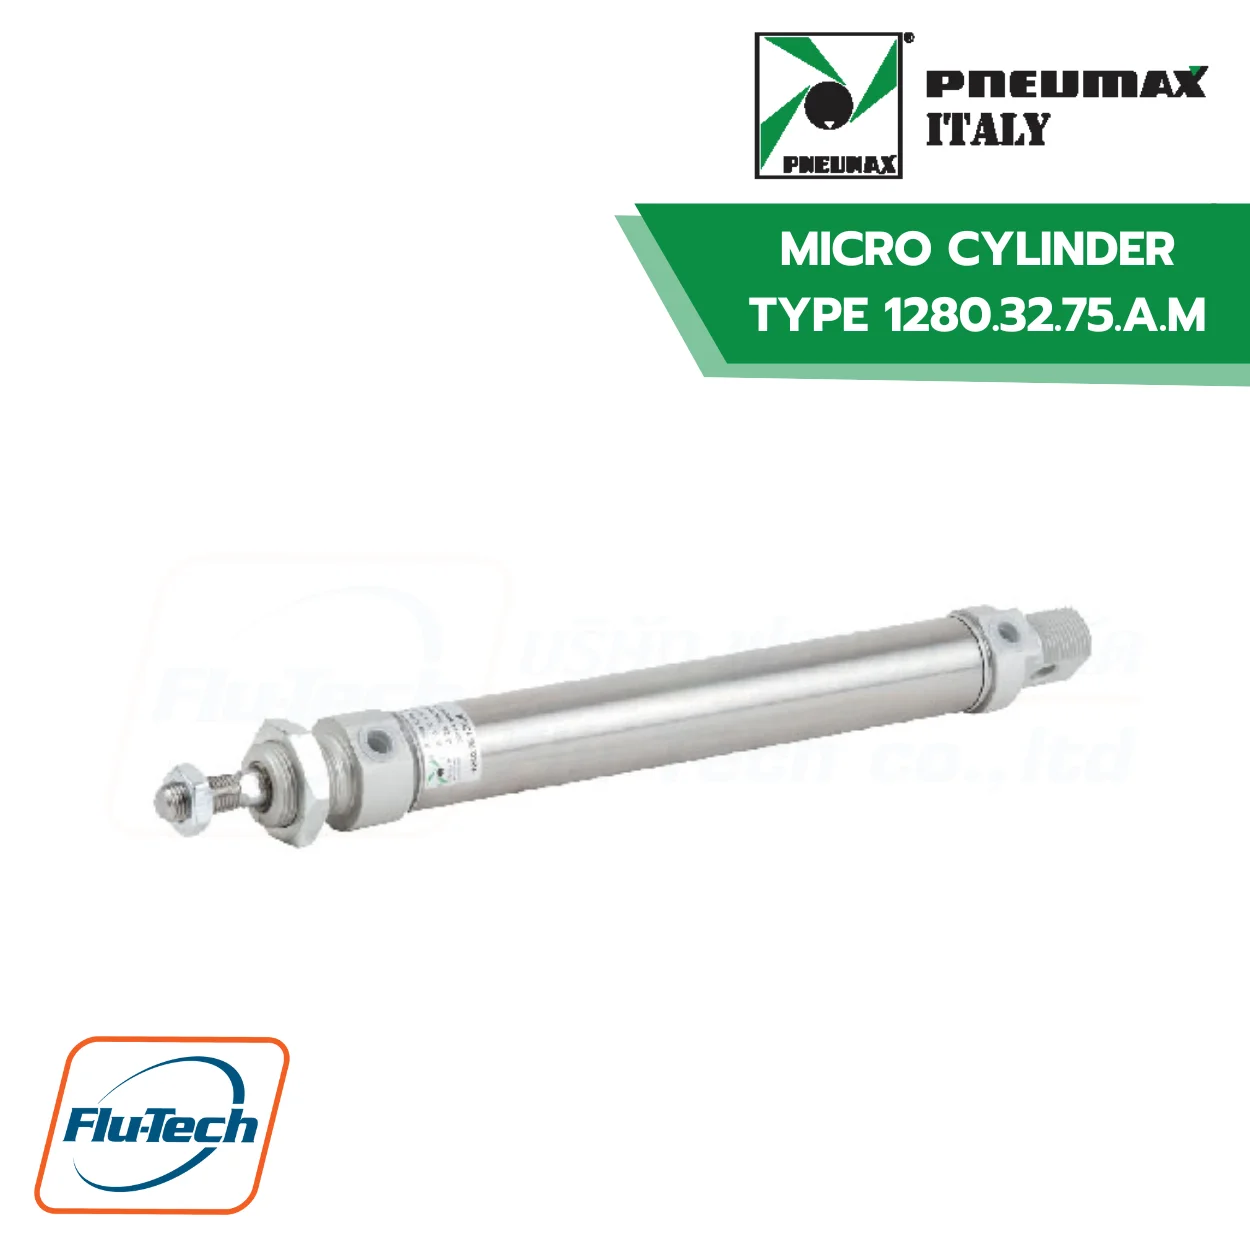 PNEUMAX - MICRO CYLINDER BORE 32 MM. STROKE 75 MM. TYPE 1280.32.75.A.M